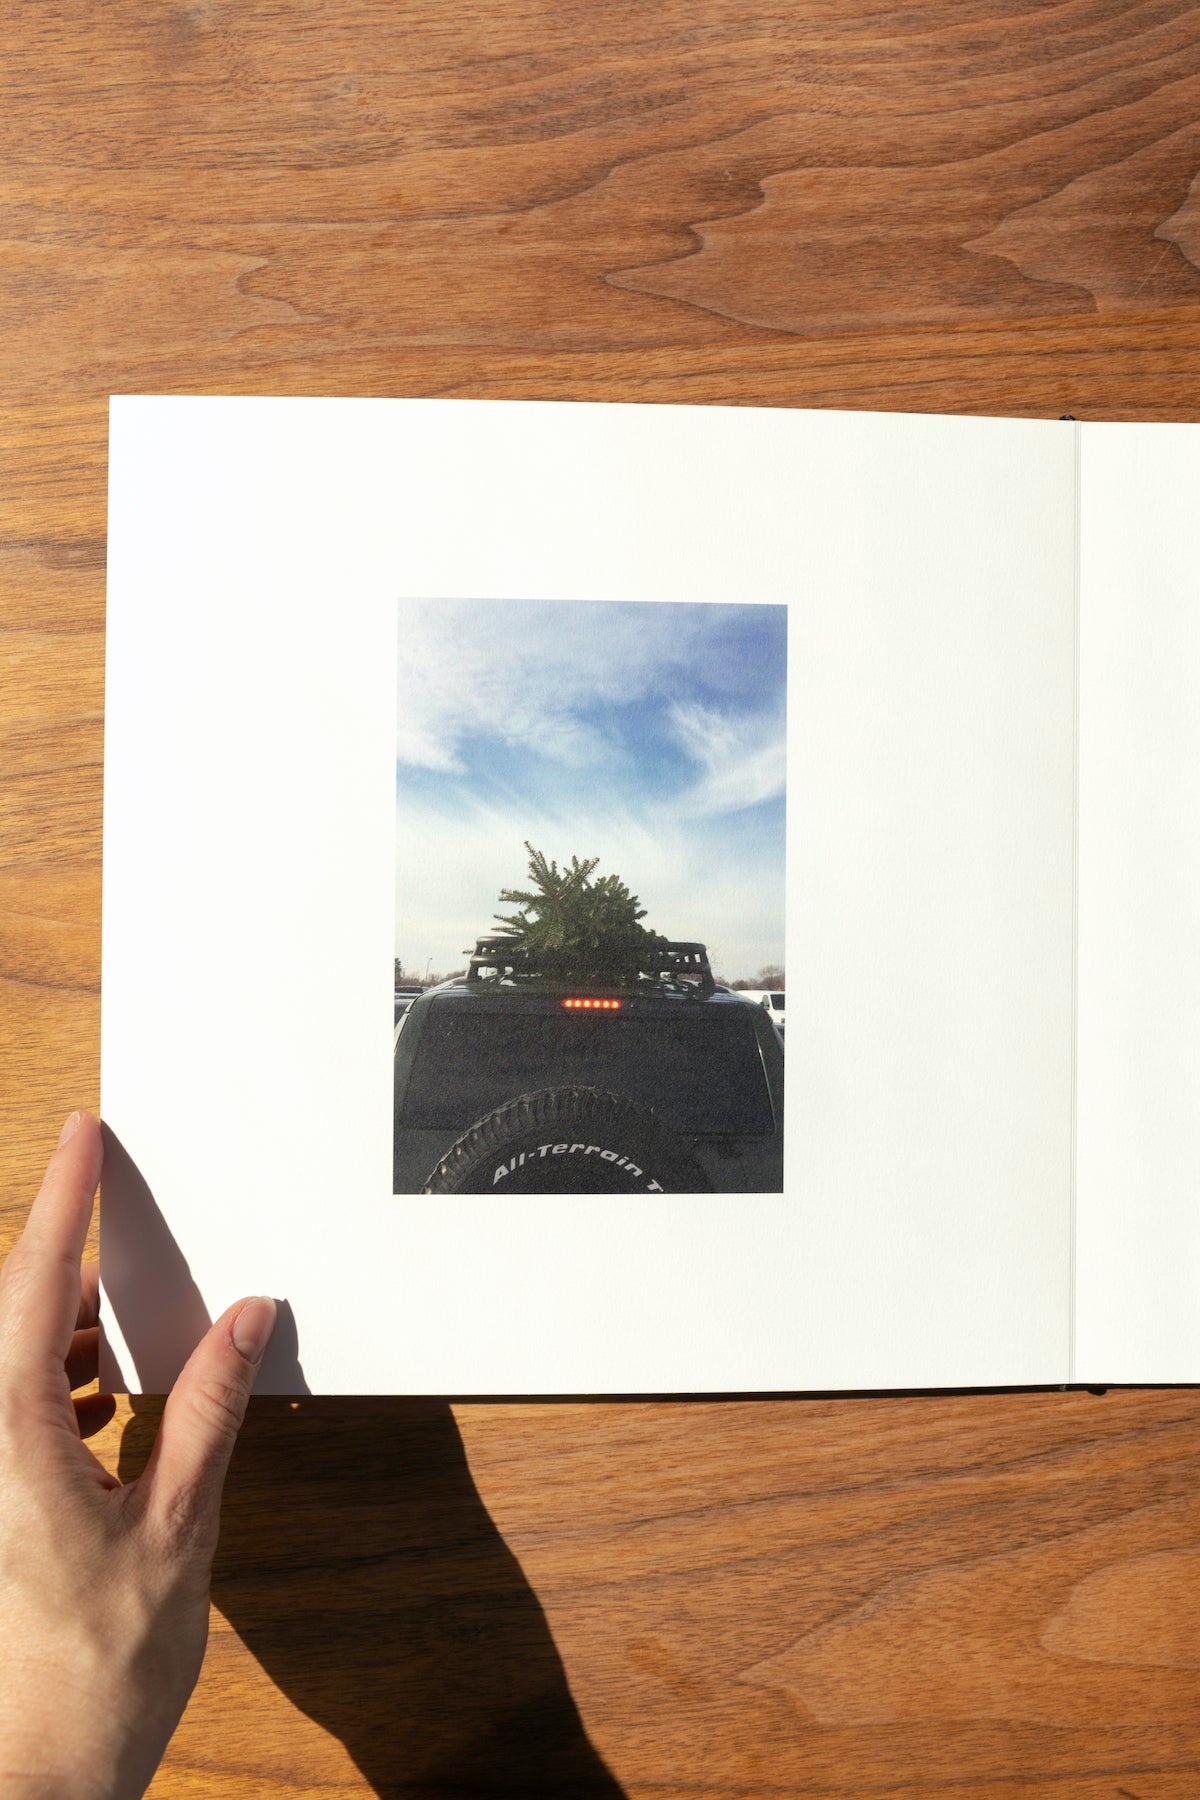 Artifact Uprising Layflat Photo Album opened to photo of pine tree strapped to the top of a Jeep